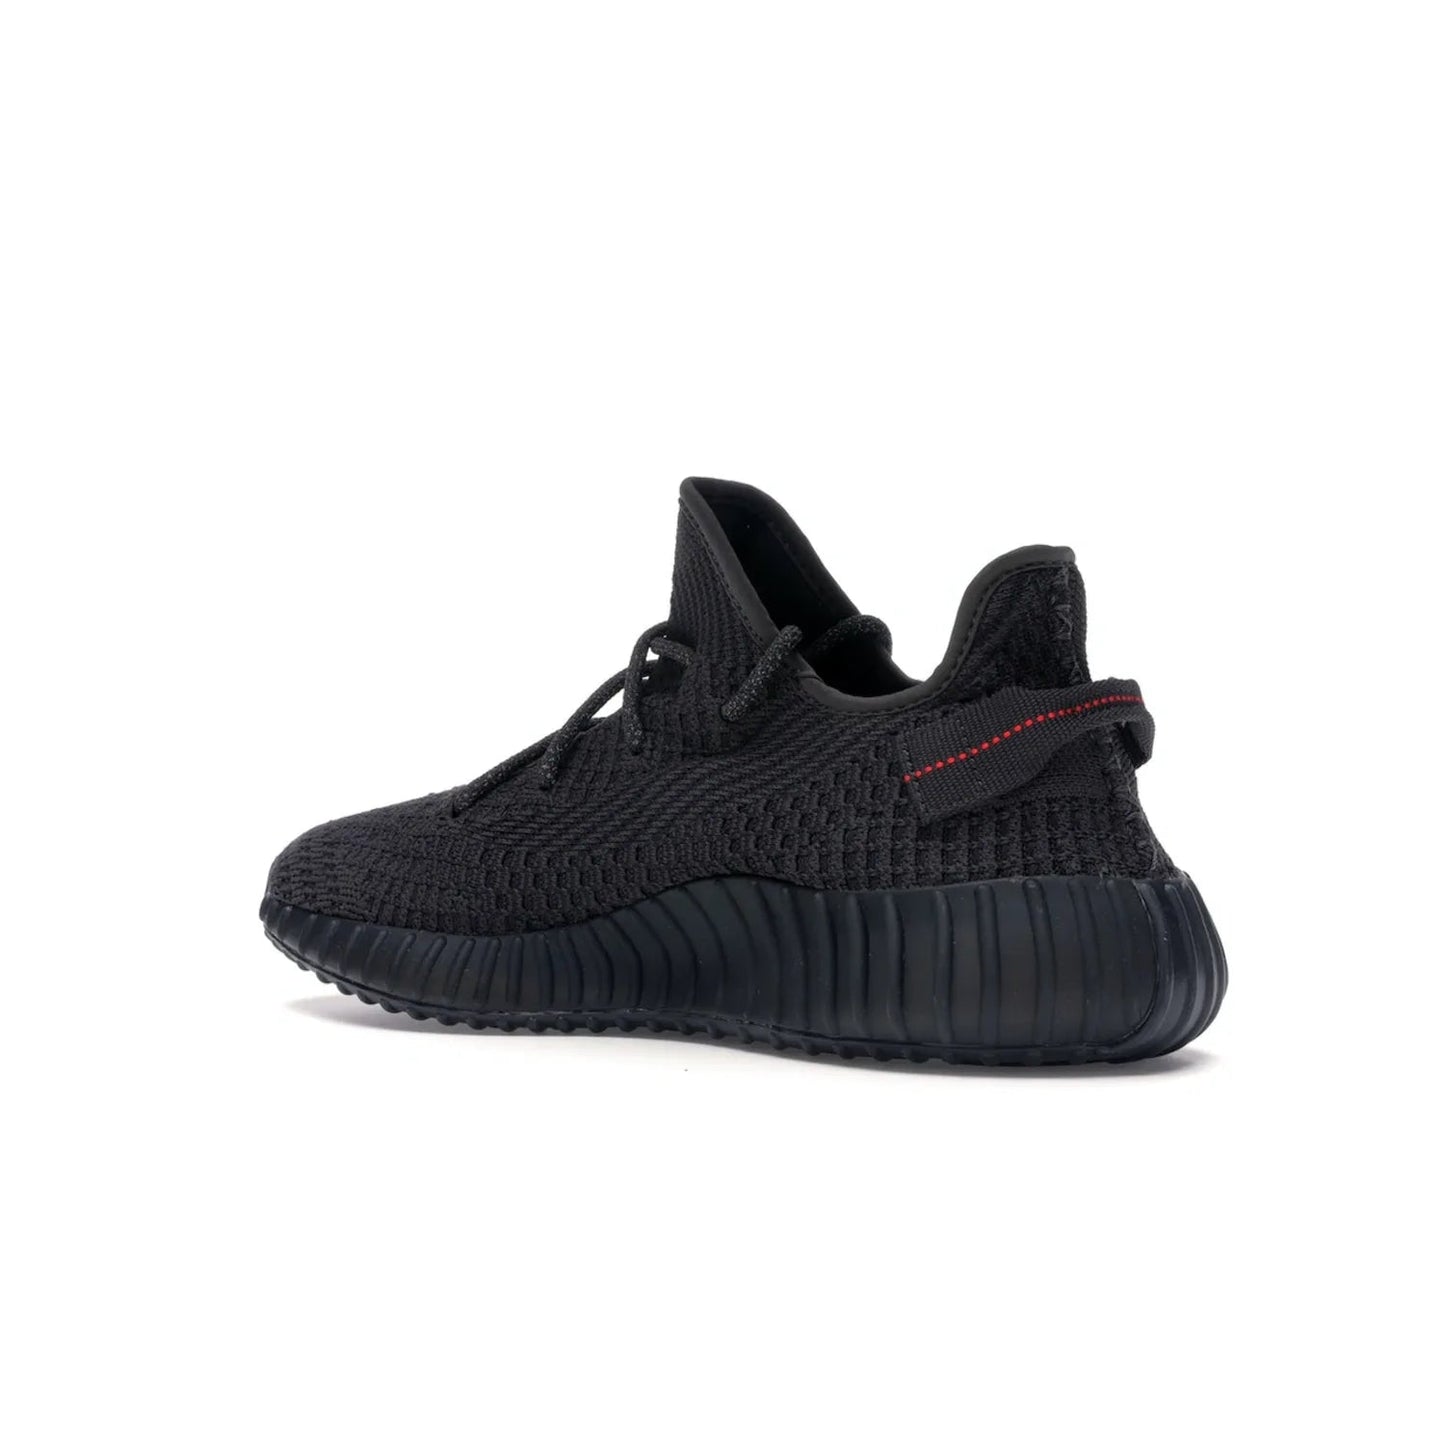 adidas Yeezy Boost 350 V2 Black (Non-Reflective) - Image 23 - Only at www.BallersClubKickz.com - A timeless, sleek silhouette crafted from quality materials. The adidas Yeezy Boost 350 V2 Black (Non-Reflective) brings style and sophistication. Get yours now!